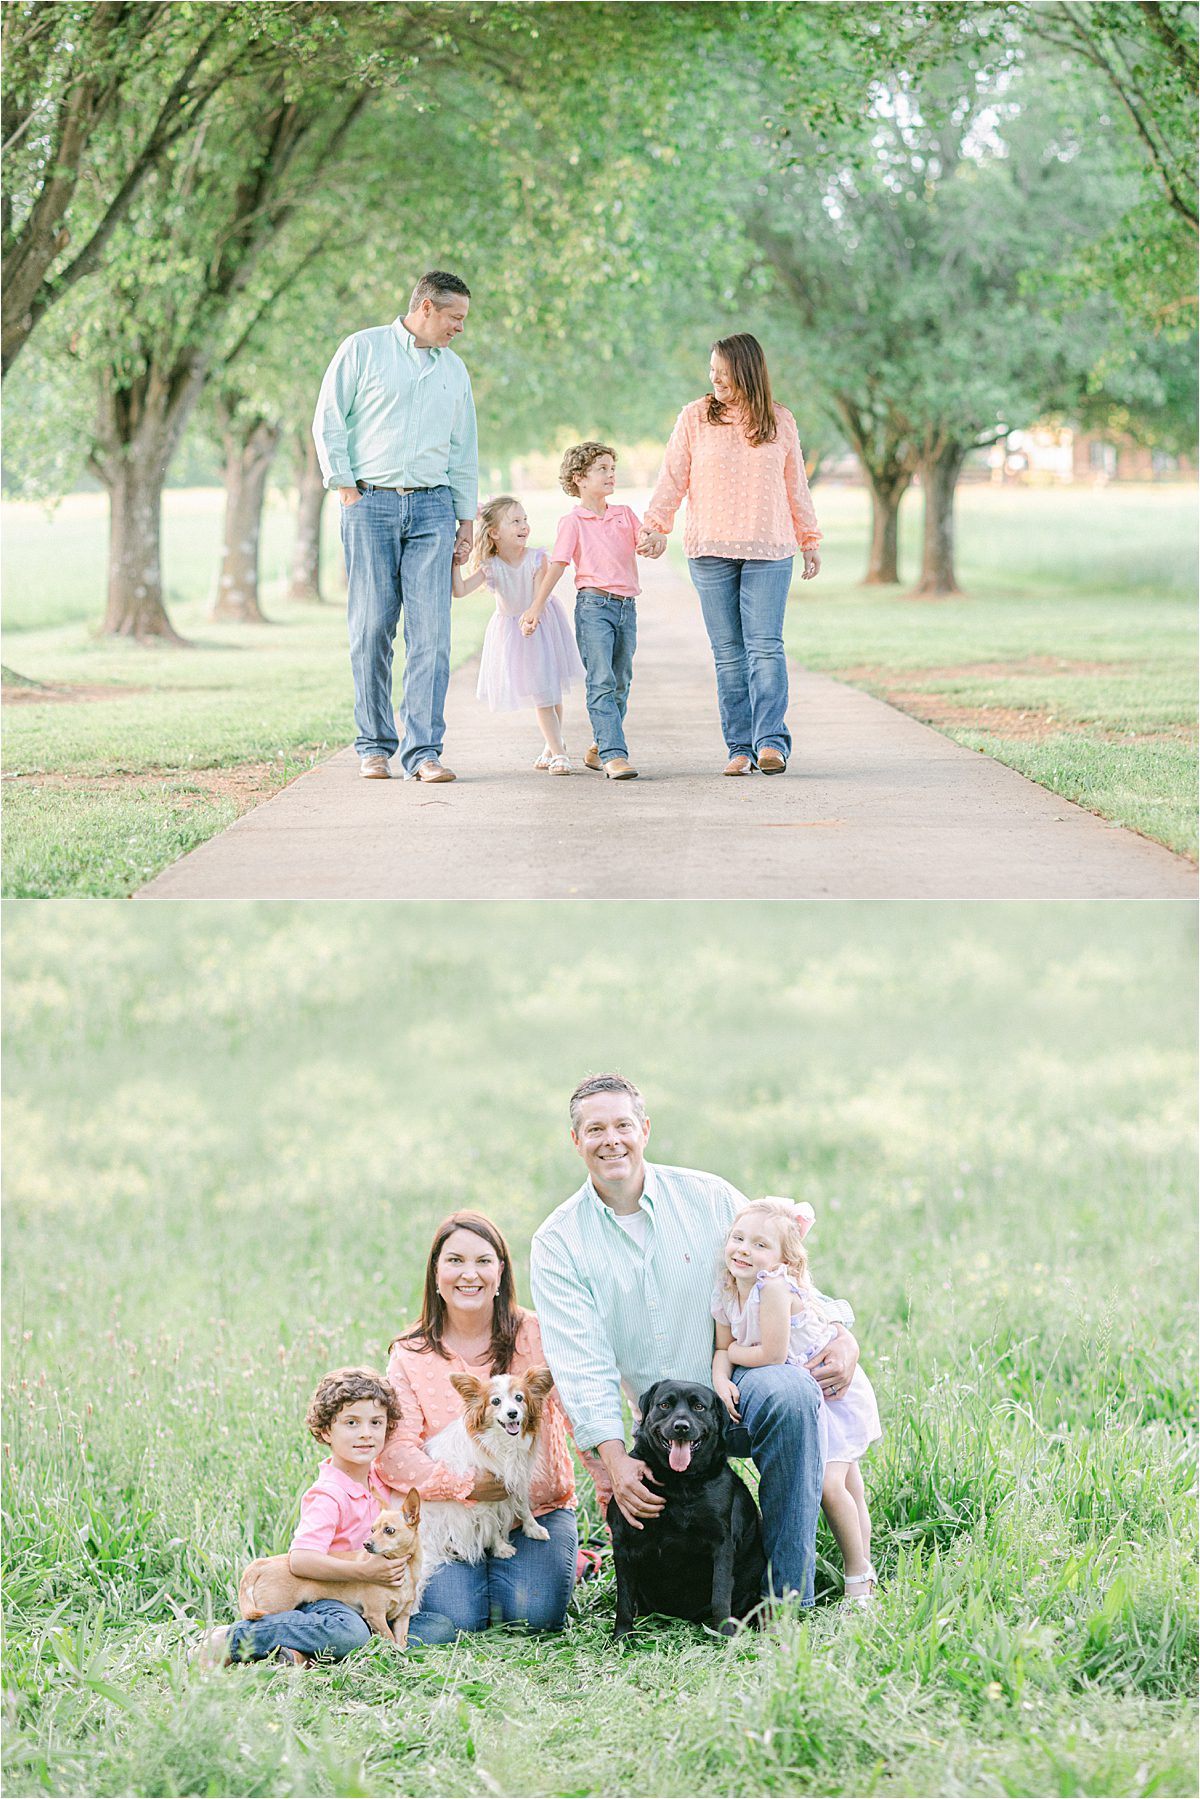 Athens, GA spring family pictures on treelined driveway and in a field by their house.